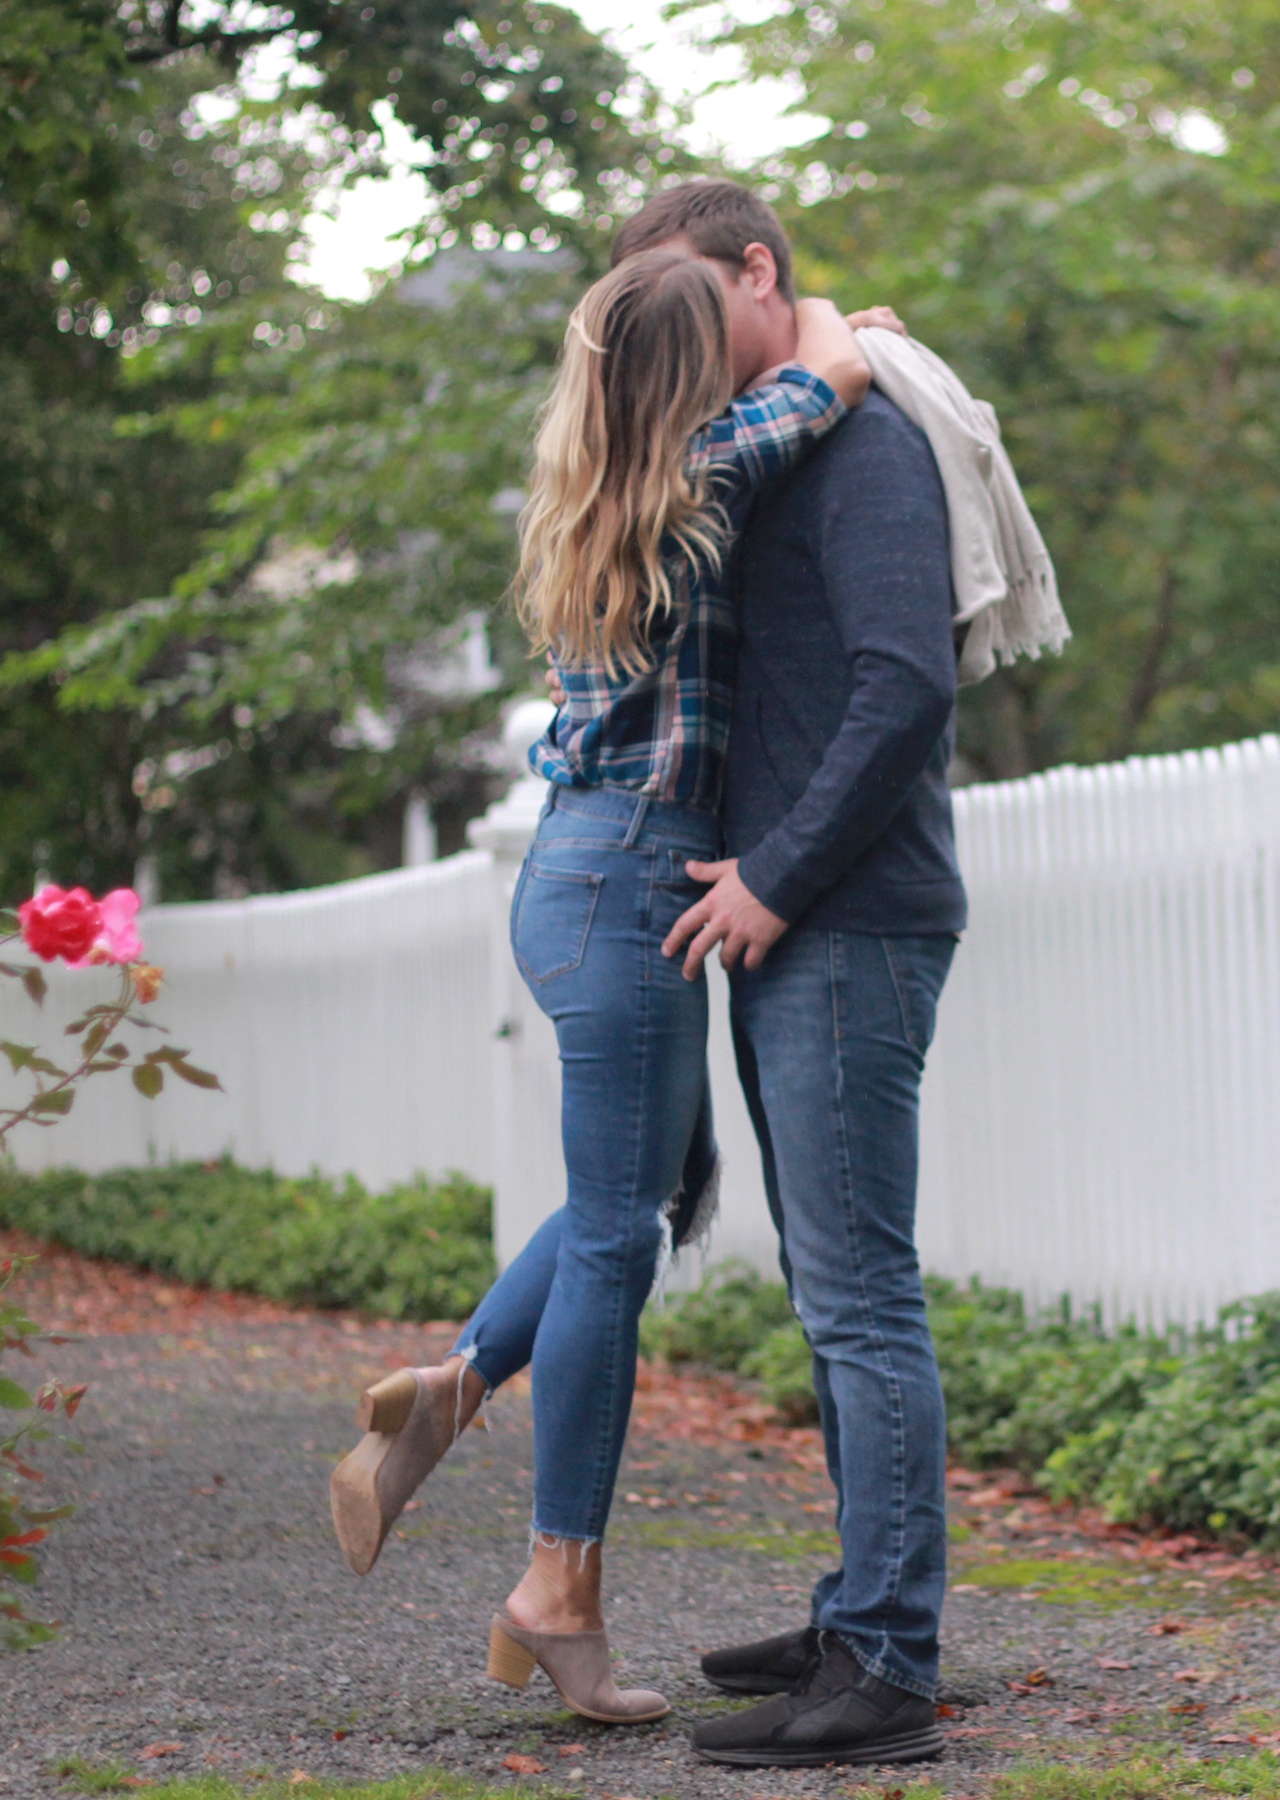 The Steele Maiden: His and Hers Casual Fall Style with Old Navy